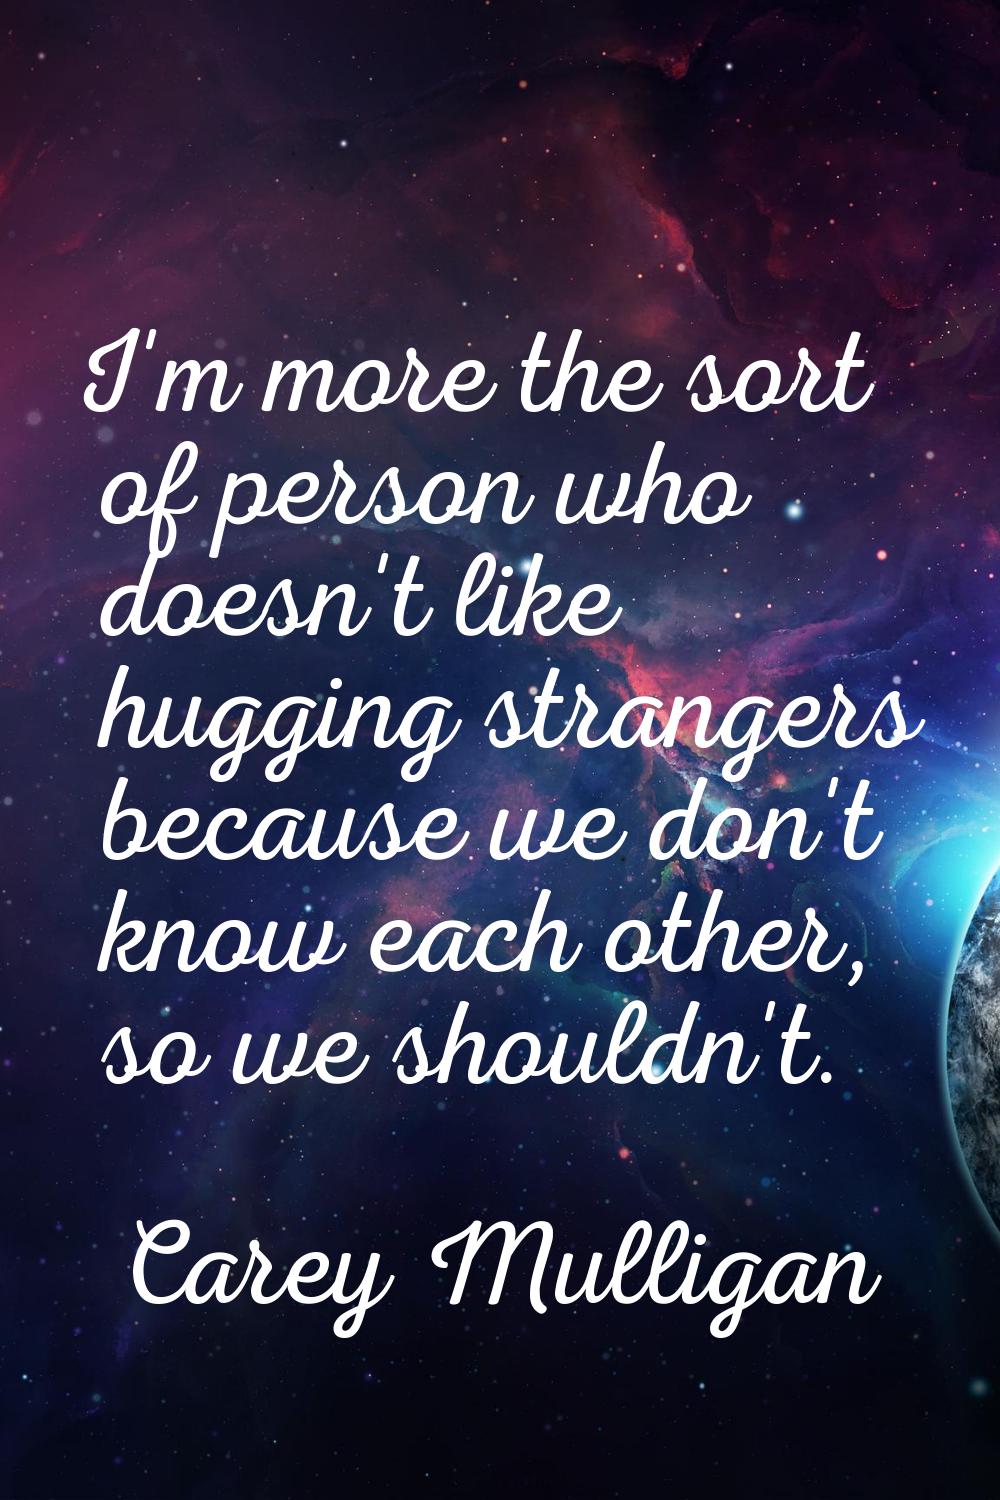 I'm more the sort of person who doesn't like hugging strangers because we don't know each other, so